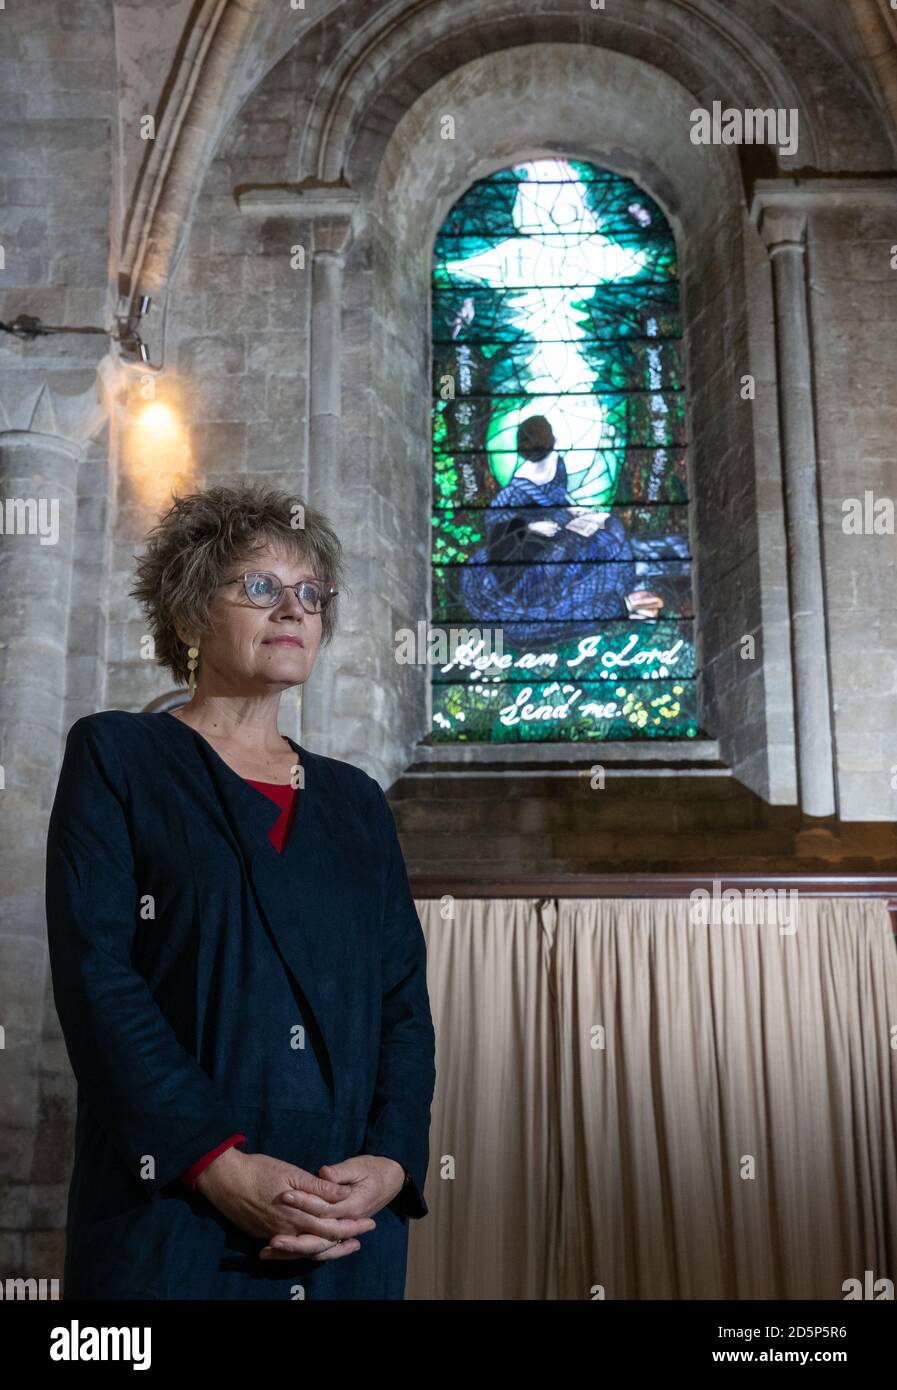 Artist Sophie Hacker stands in front of the newly installed stained glass window of Florence Nightingale, known as 'The Calling Window', in Romsey Abbey in Hampshire. The window, which has been installed to mark the bicentenary of her birth, depicts Florence seated on a stone bench in the grounds of her family home, Embley Park, and shows the moment when she said she was called to God aged 16. Stock Photo